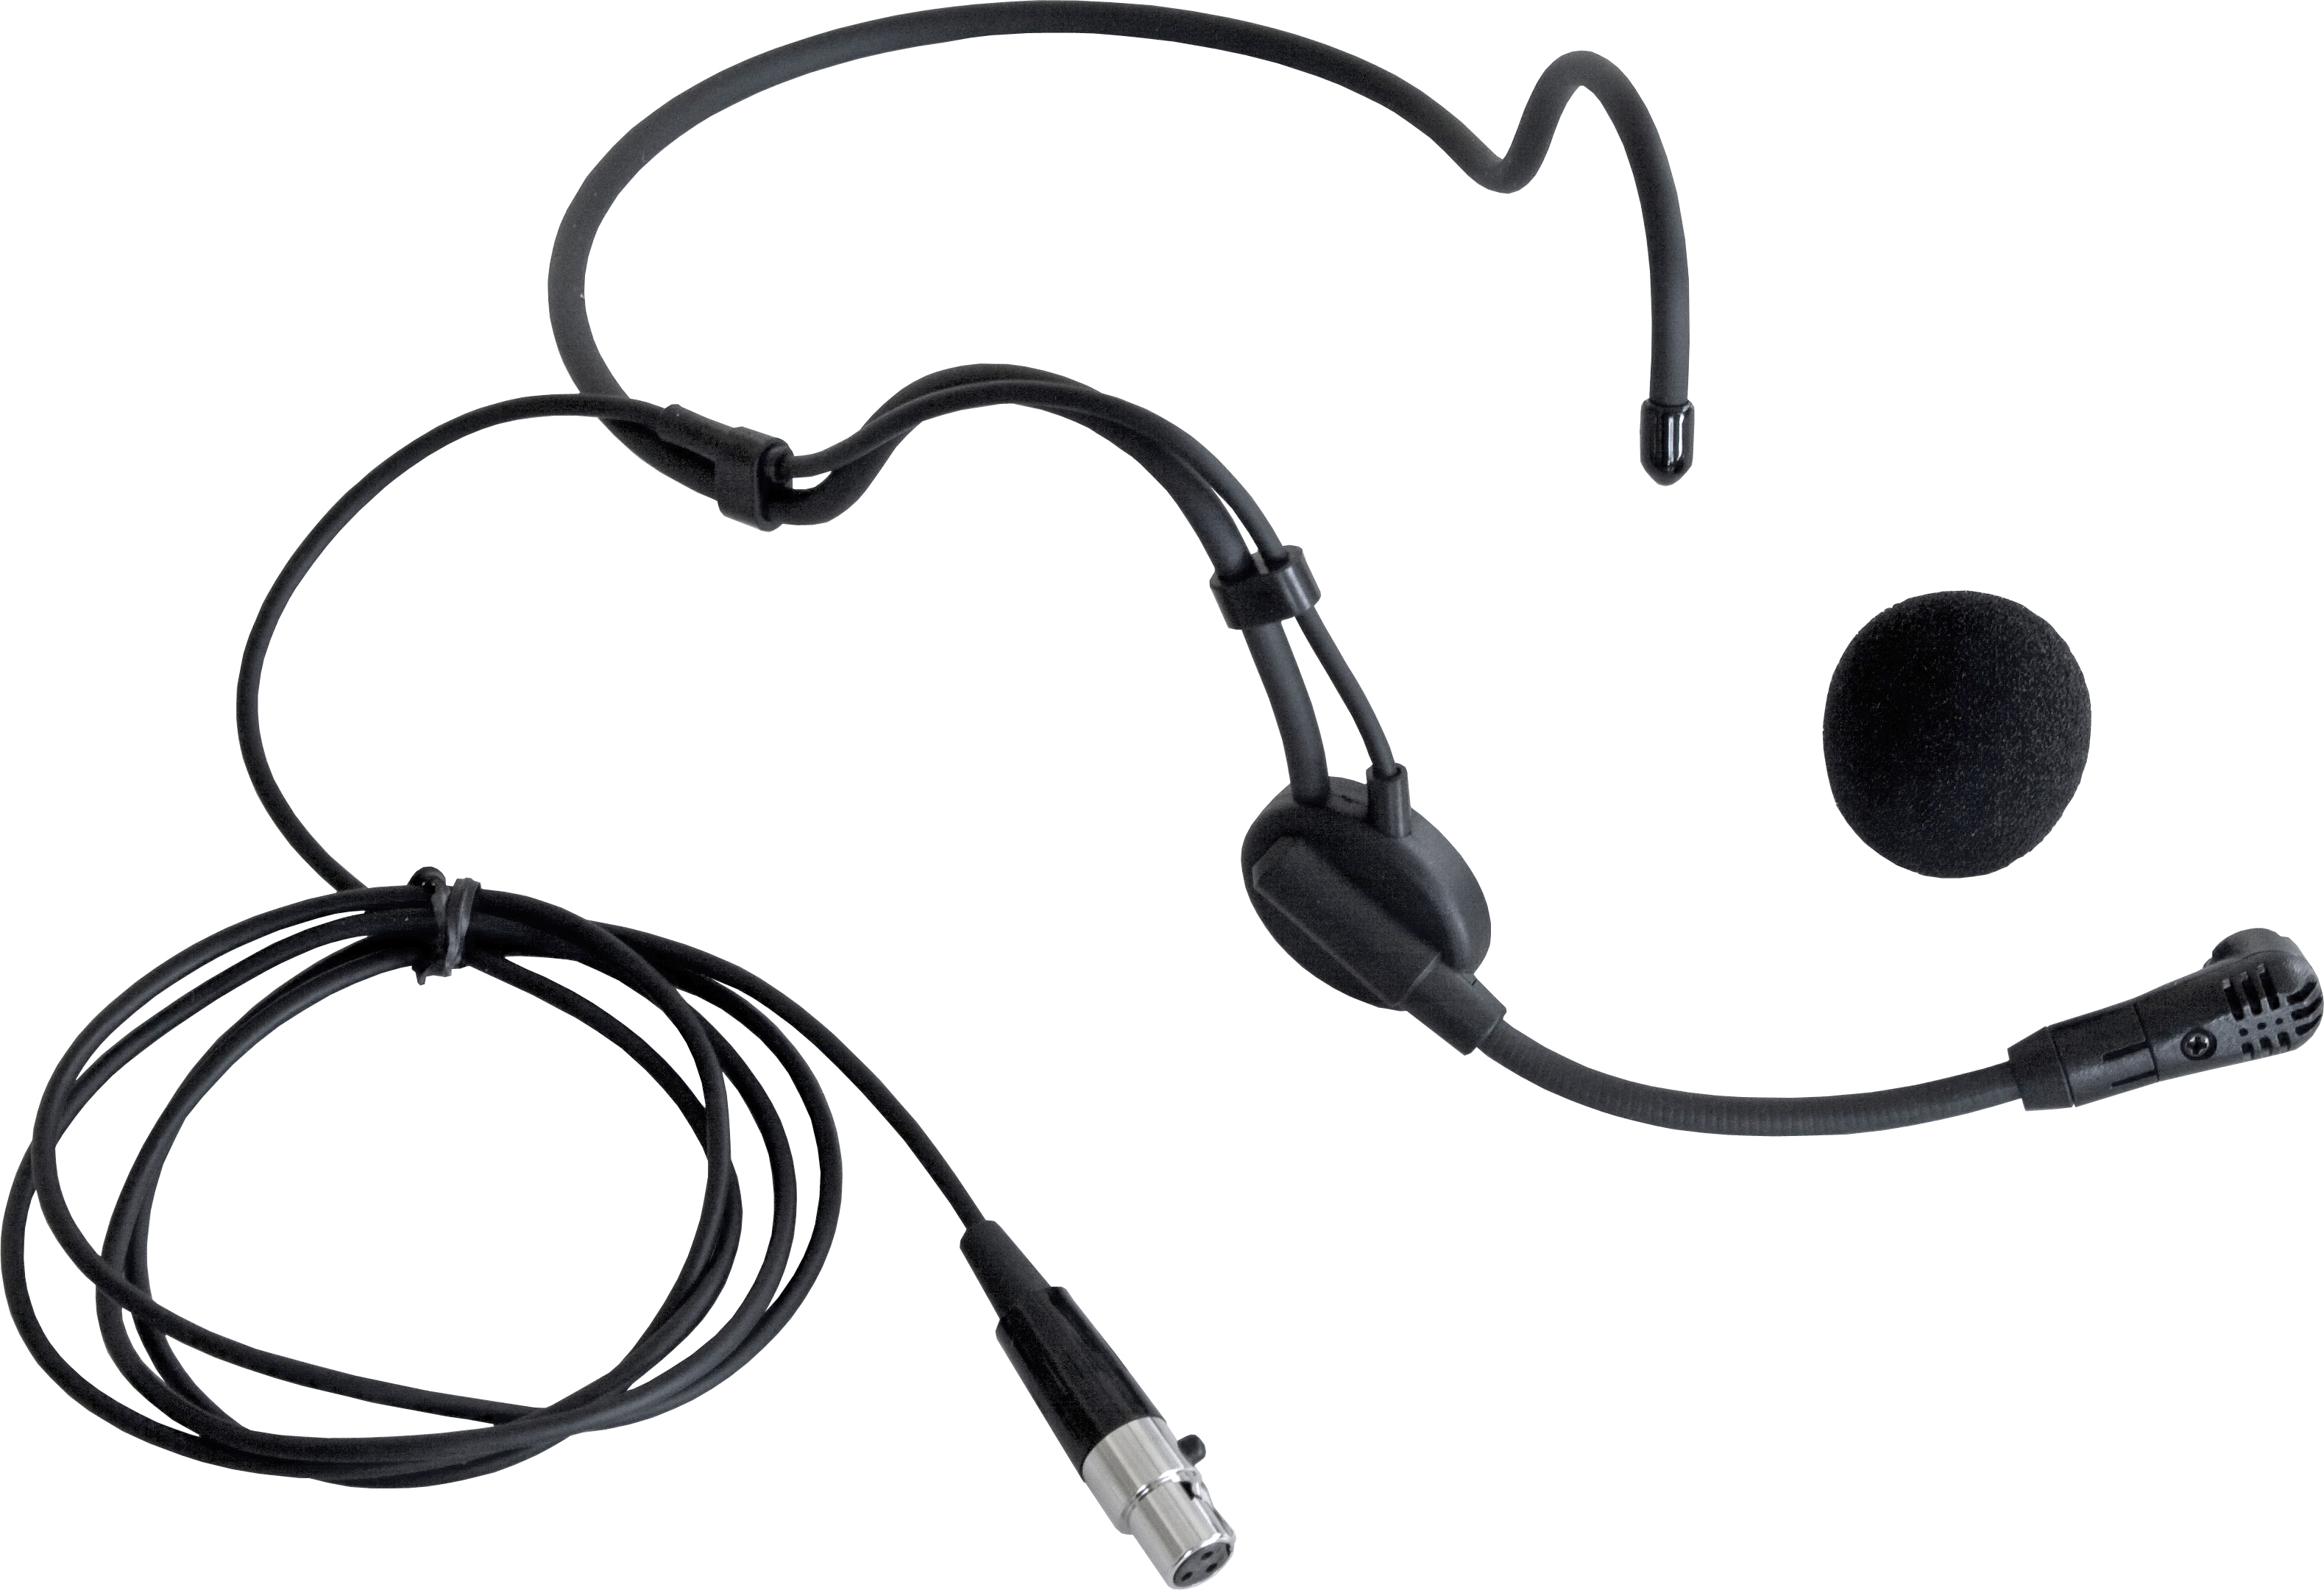 WHS-20 is a rugged, lightweight headset microphone, based on a high quality condenser element